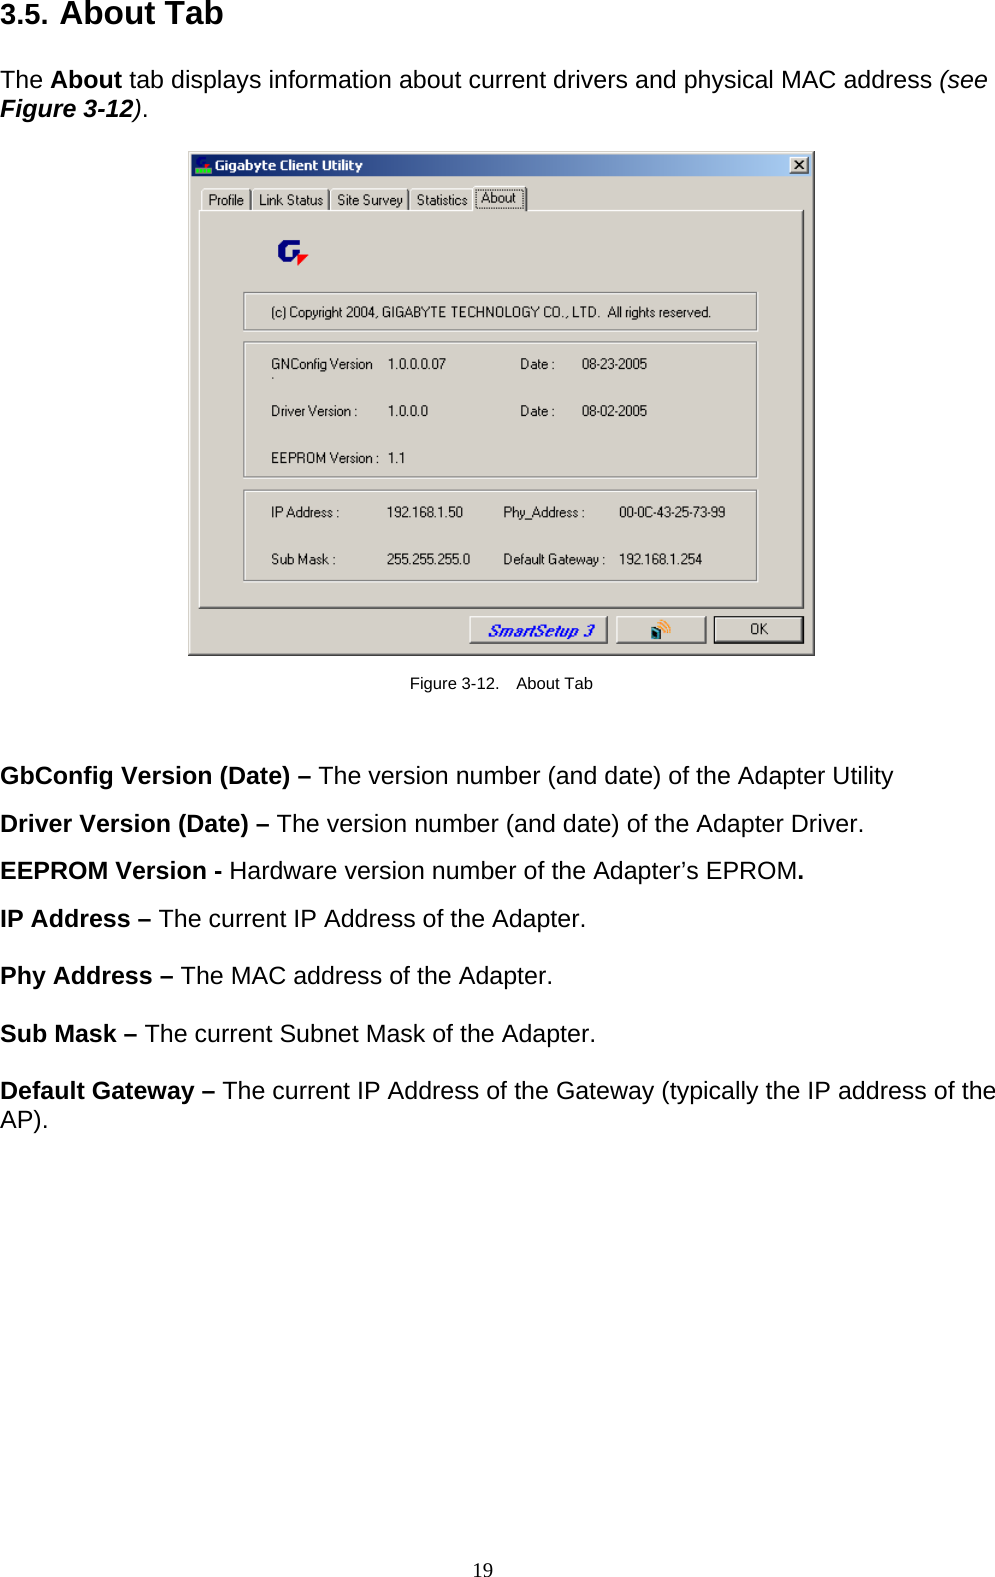 19   3.5. About Tab  The About tab displays information about current drivers and physical MAC address (see Figure 3-12).    Figure 3-12.  About Tab  GbConfig Version (Date) – The version number (and date) of the Adapter Utility  Driver Version (Date) – The version number (and date) of the Adapter Driver.  EEPROM Version - Hardware version number of the Adapter’s EPROM.  IP Address – The current IP Address of the Adapter.  Phy Address – The MAC address of the Adapter.  Sub Mask – The current Subnet Mask of the Adapter.  Default Gateway – The current IP Address of the Gateway (typically the IP address of the AP).  